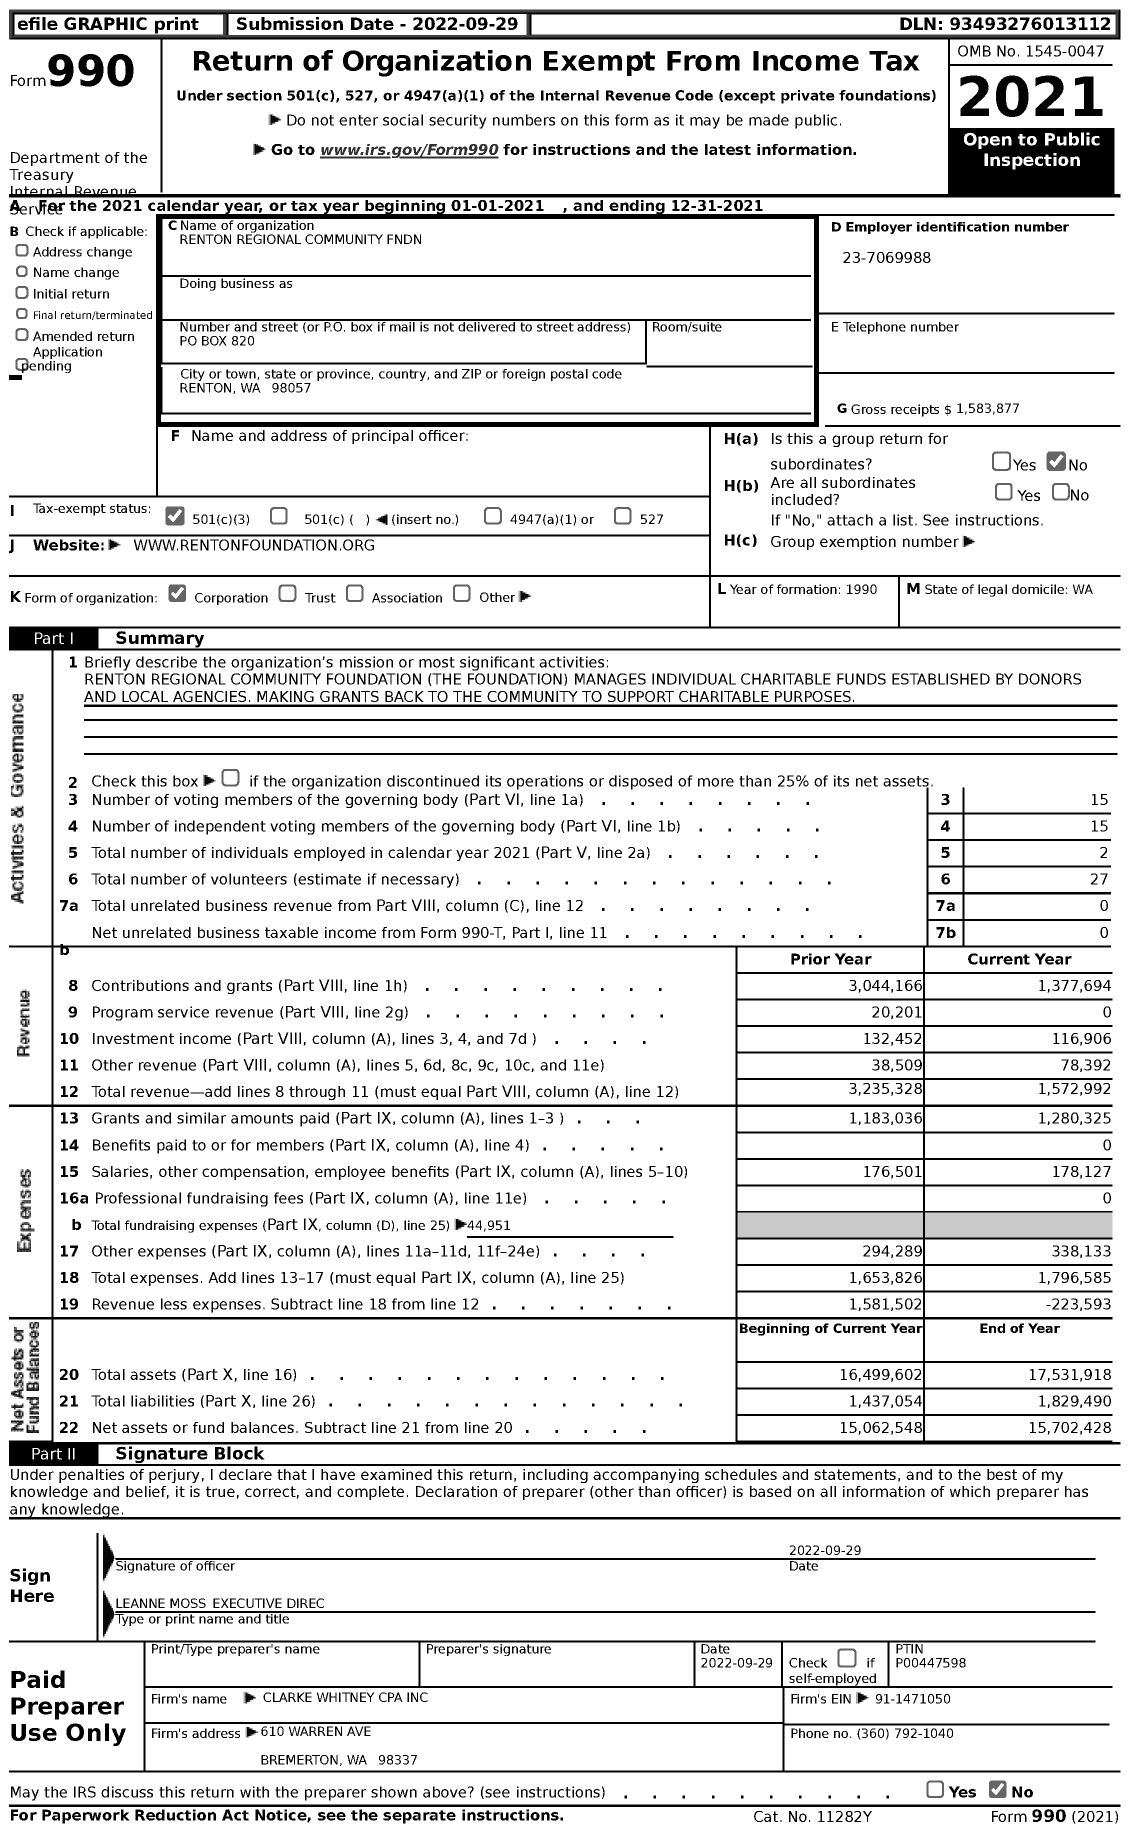 Image of first page of 2021 Form 990 for Renton Regional Community FNDN